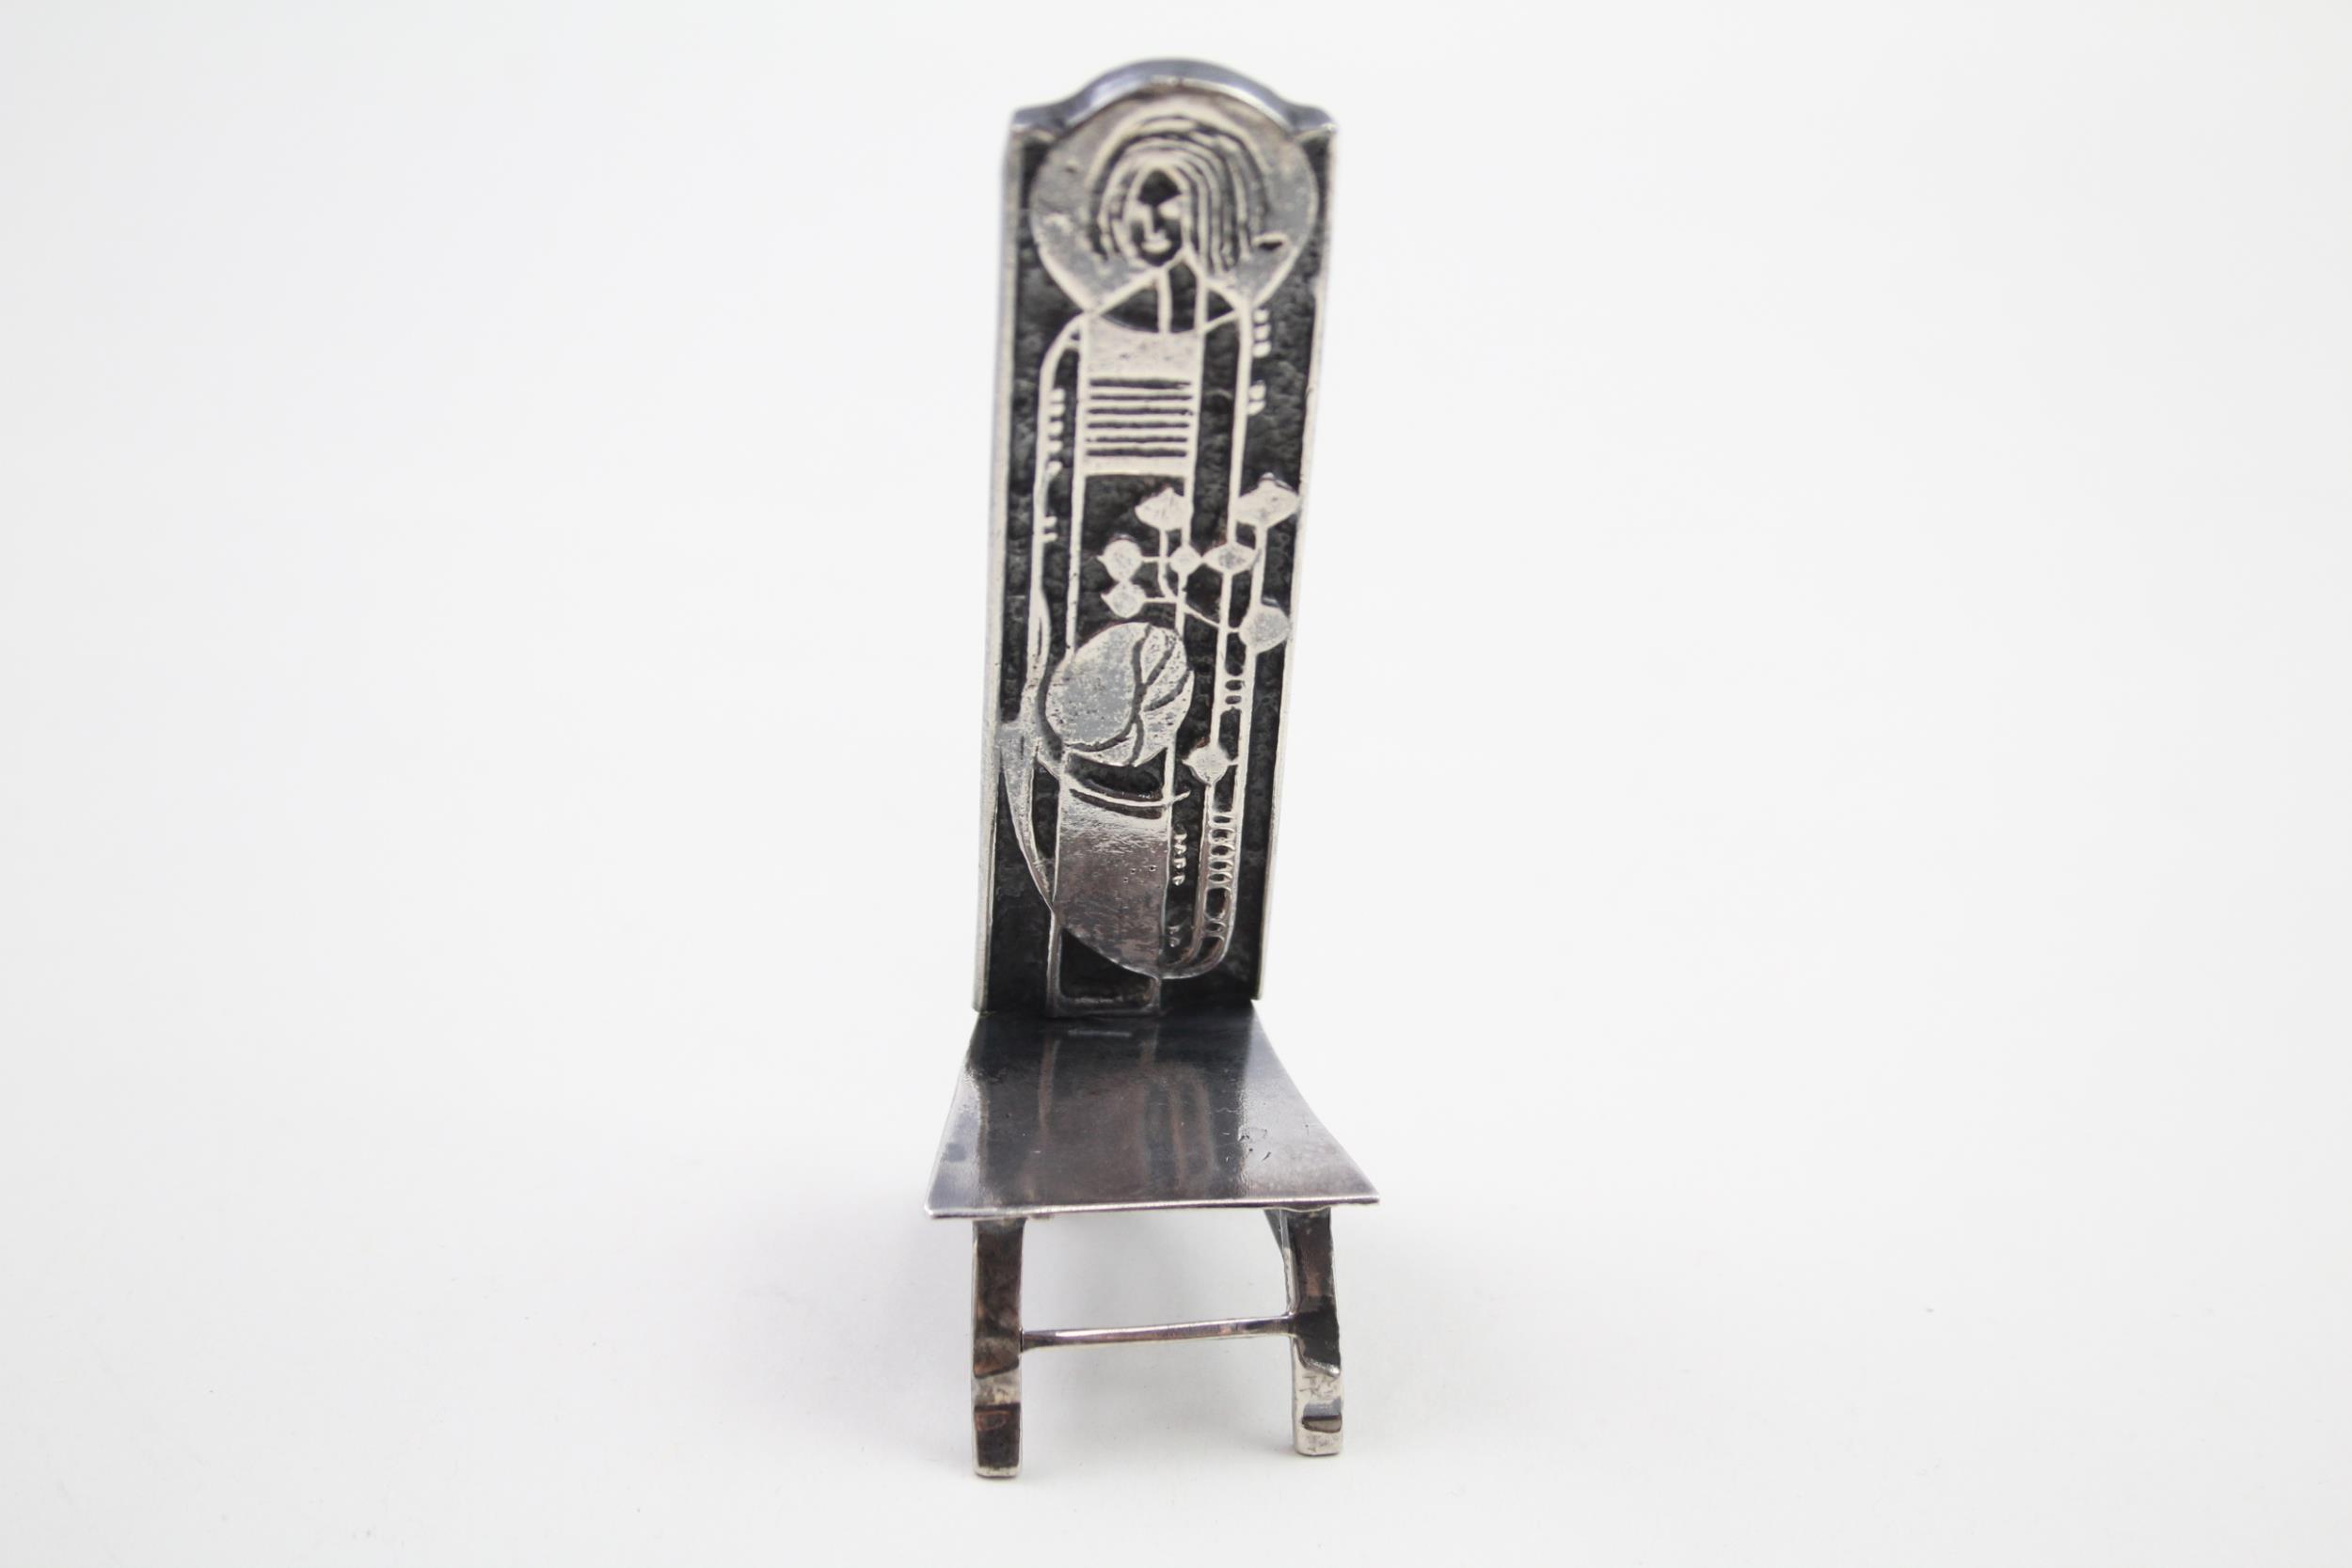 Vintage .950 Silver Art Nouveau Style Miniature Chair (43g) - XRF TESTED FOR PURITY Height - 9cm